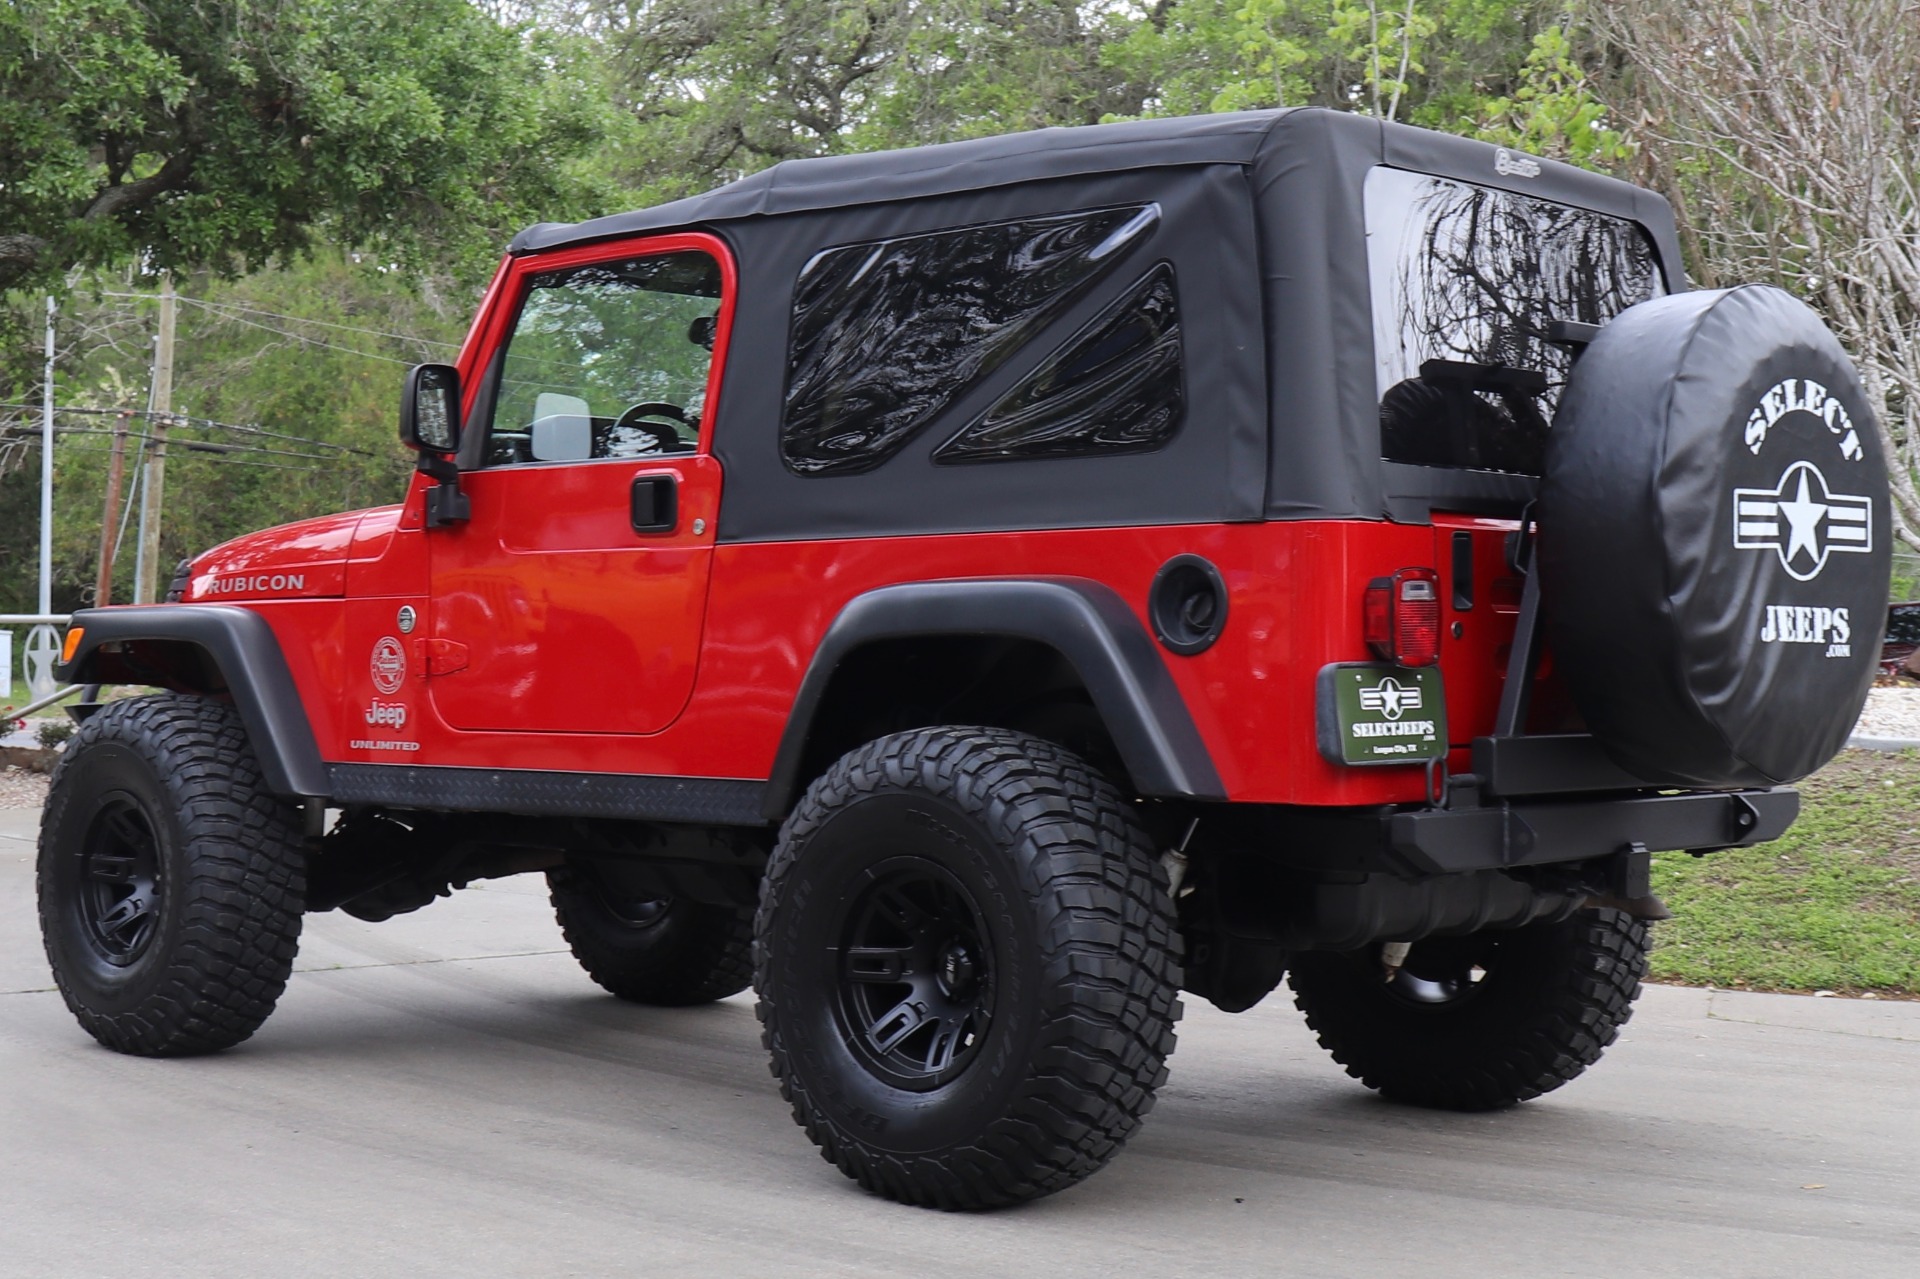 Used-2006-Jeep-Wrangler-Unlimited-Rubicon